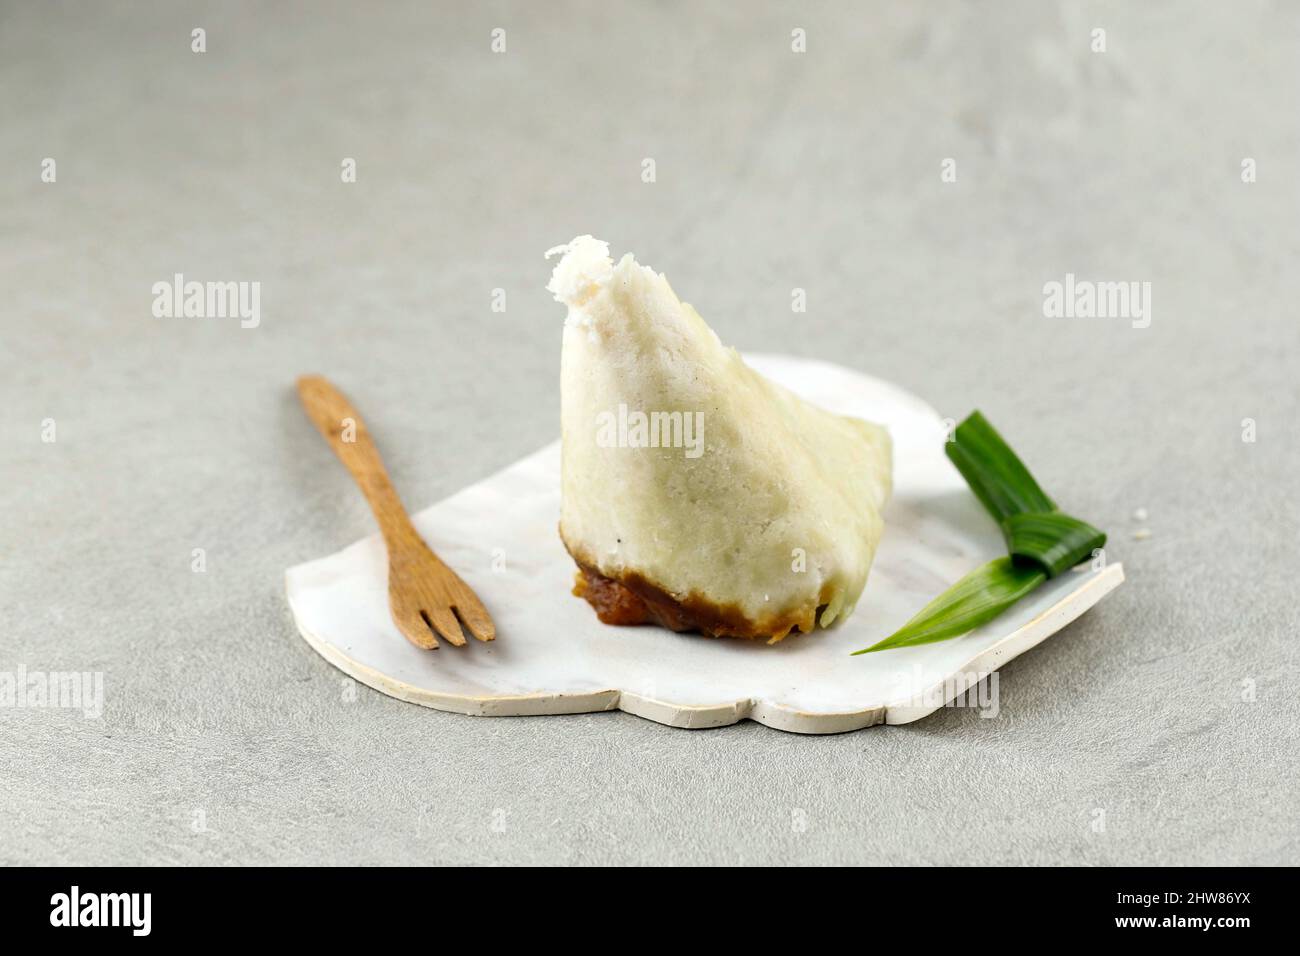 Awug Beras, Steamed Rice Flour, Shredded Coconut, and Palm Sugar, Popular Street Food from Bandung, West Java, Indonesia. Stock Photo